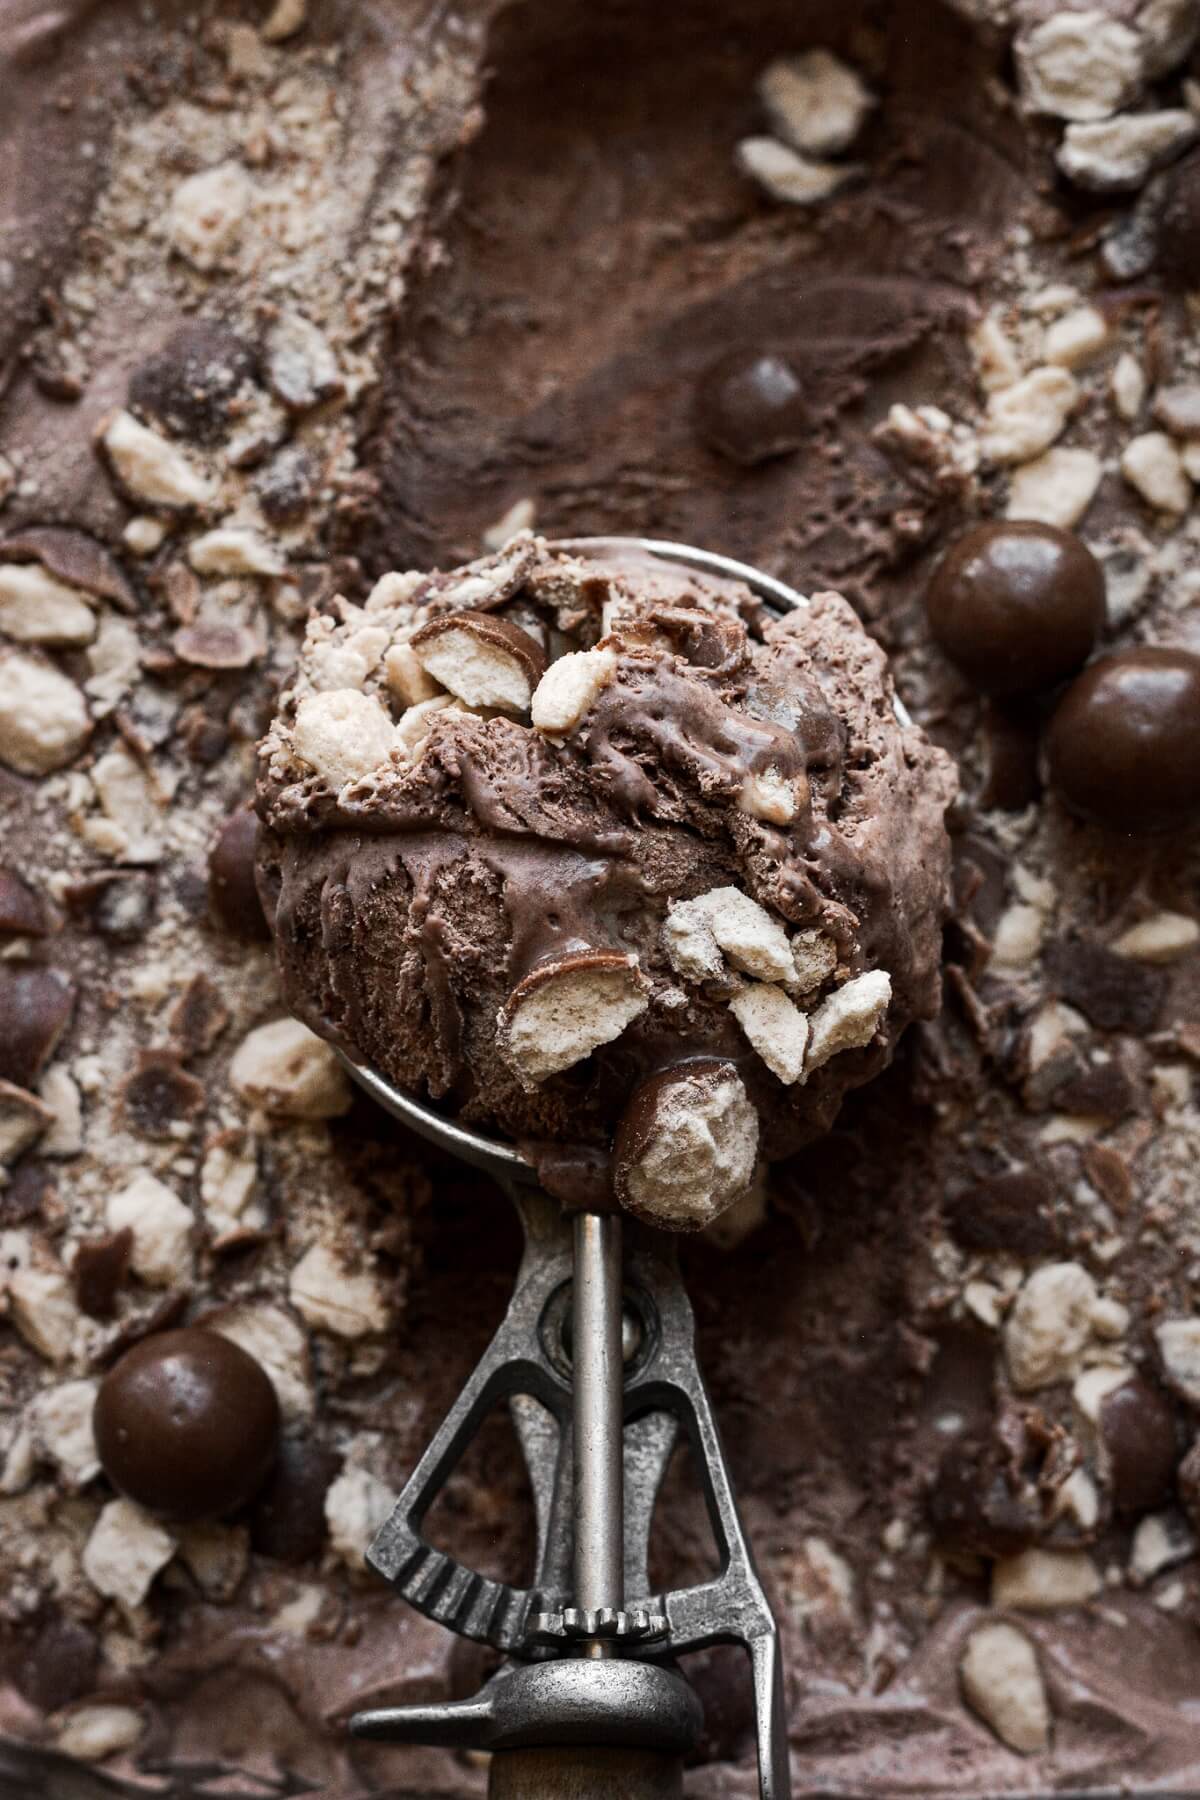 A scoop of chocolate malt ice cream with crushed Whoppers.